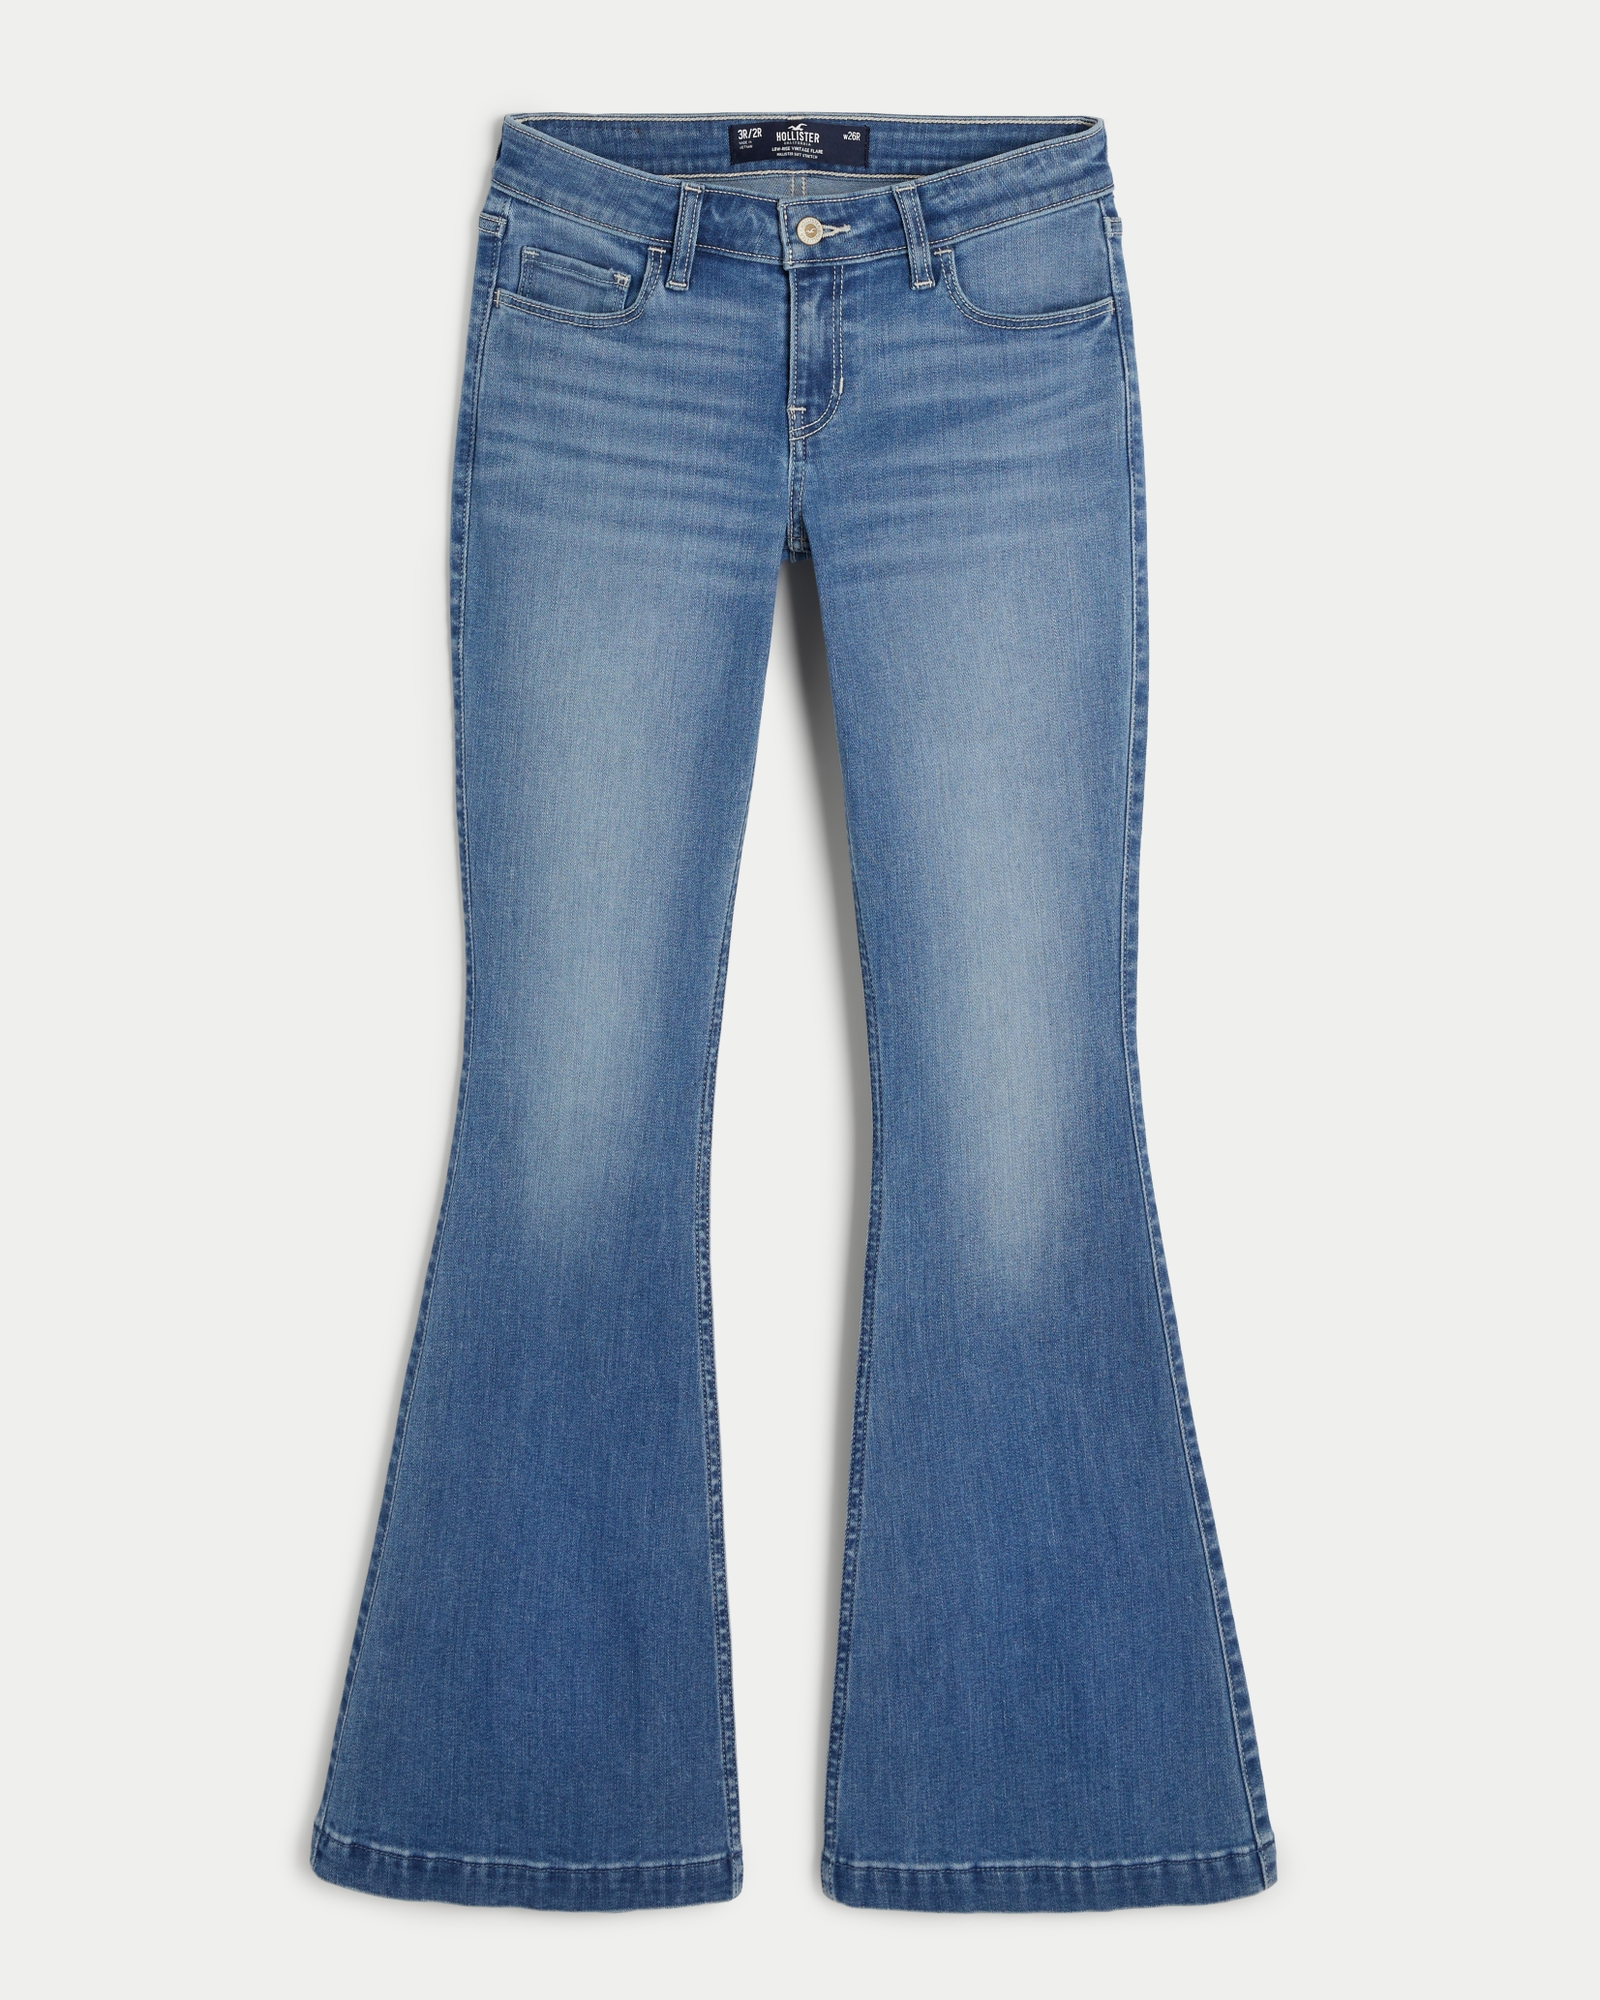 Women's Low-Rise Flare Jeans